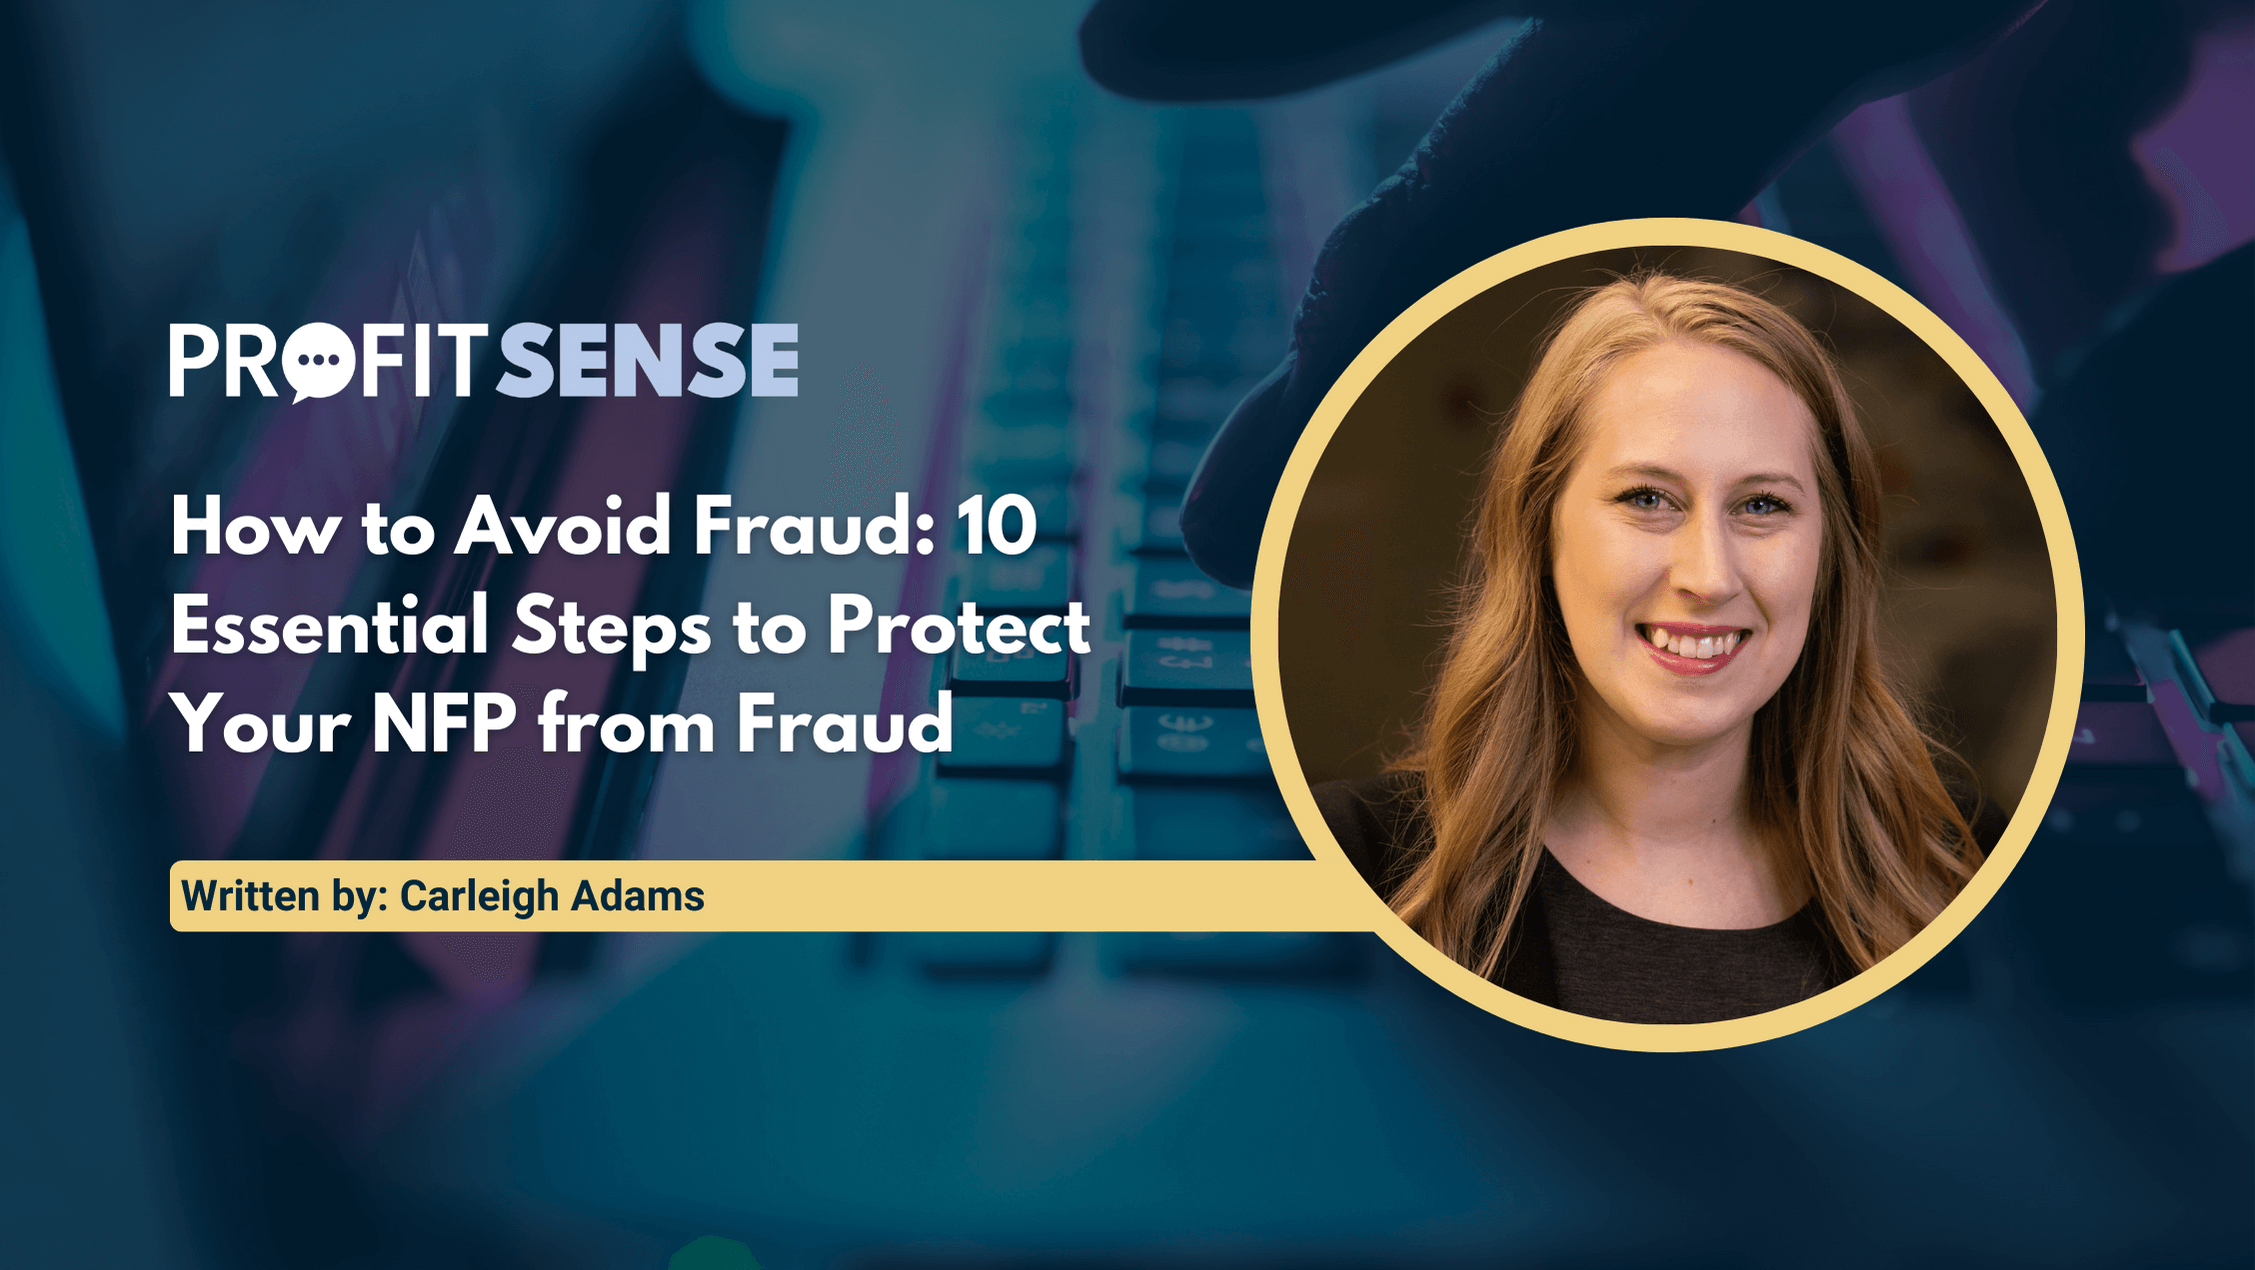 How to Avoid Fraud: 10 Essential Steps to Protect Your NFP from Fraud